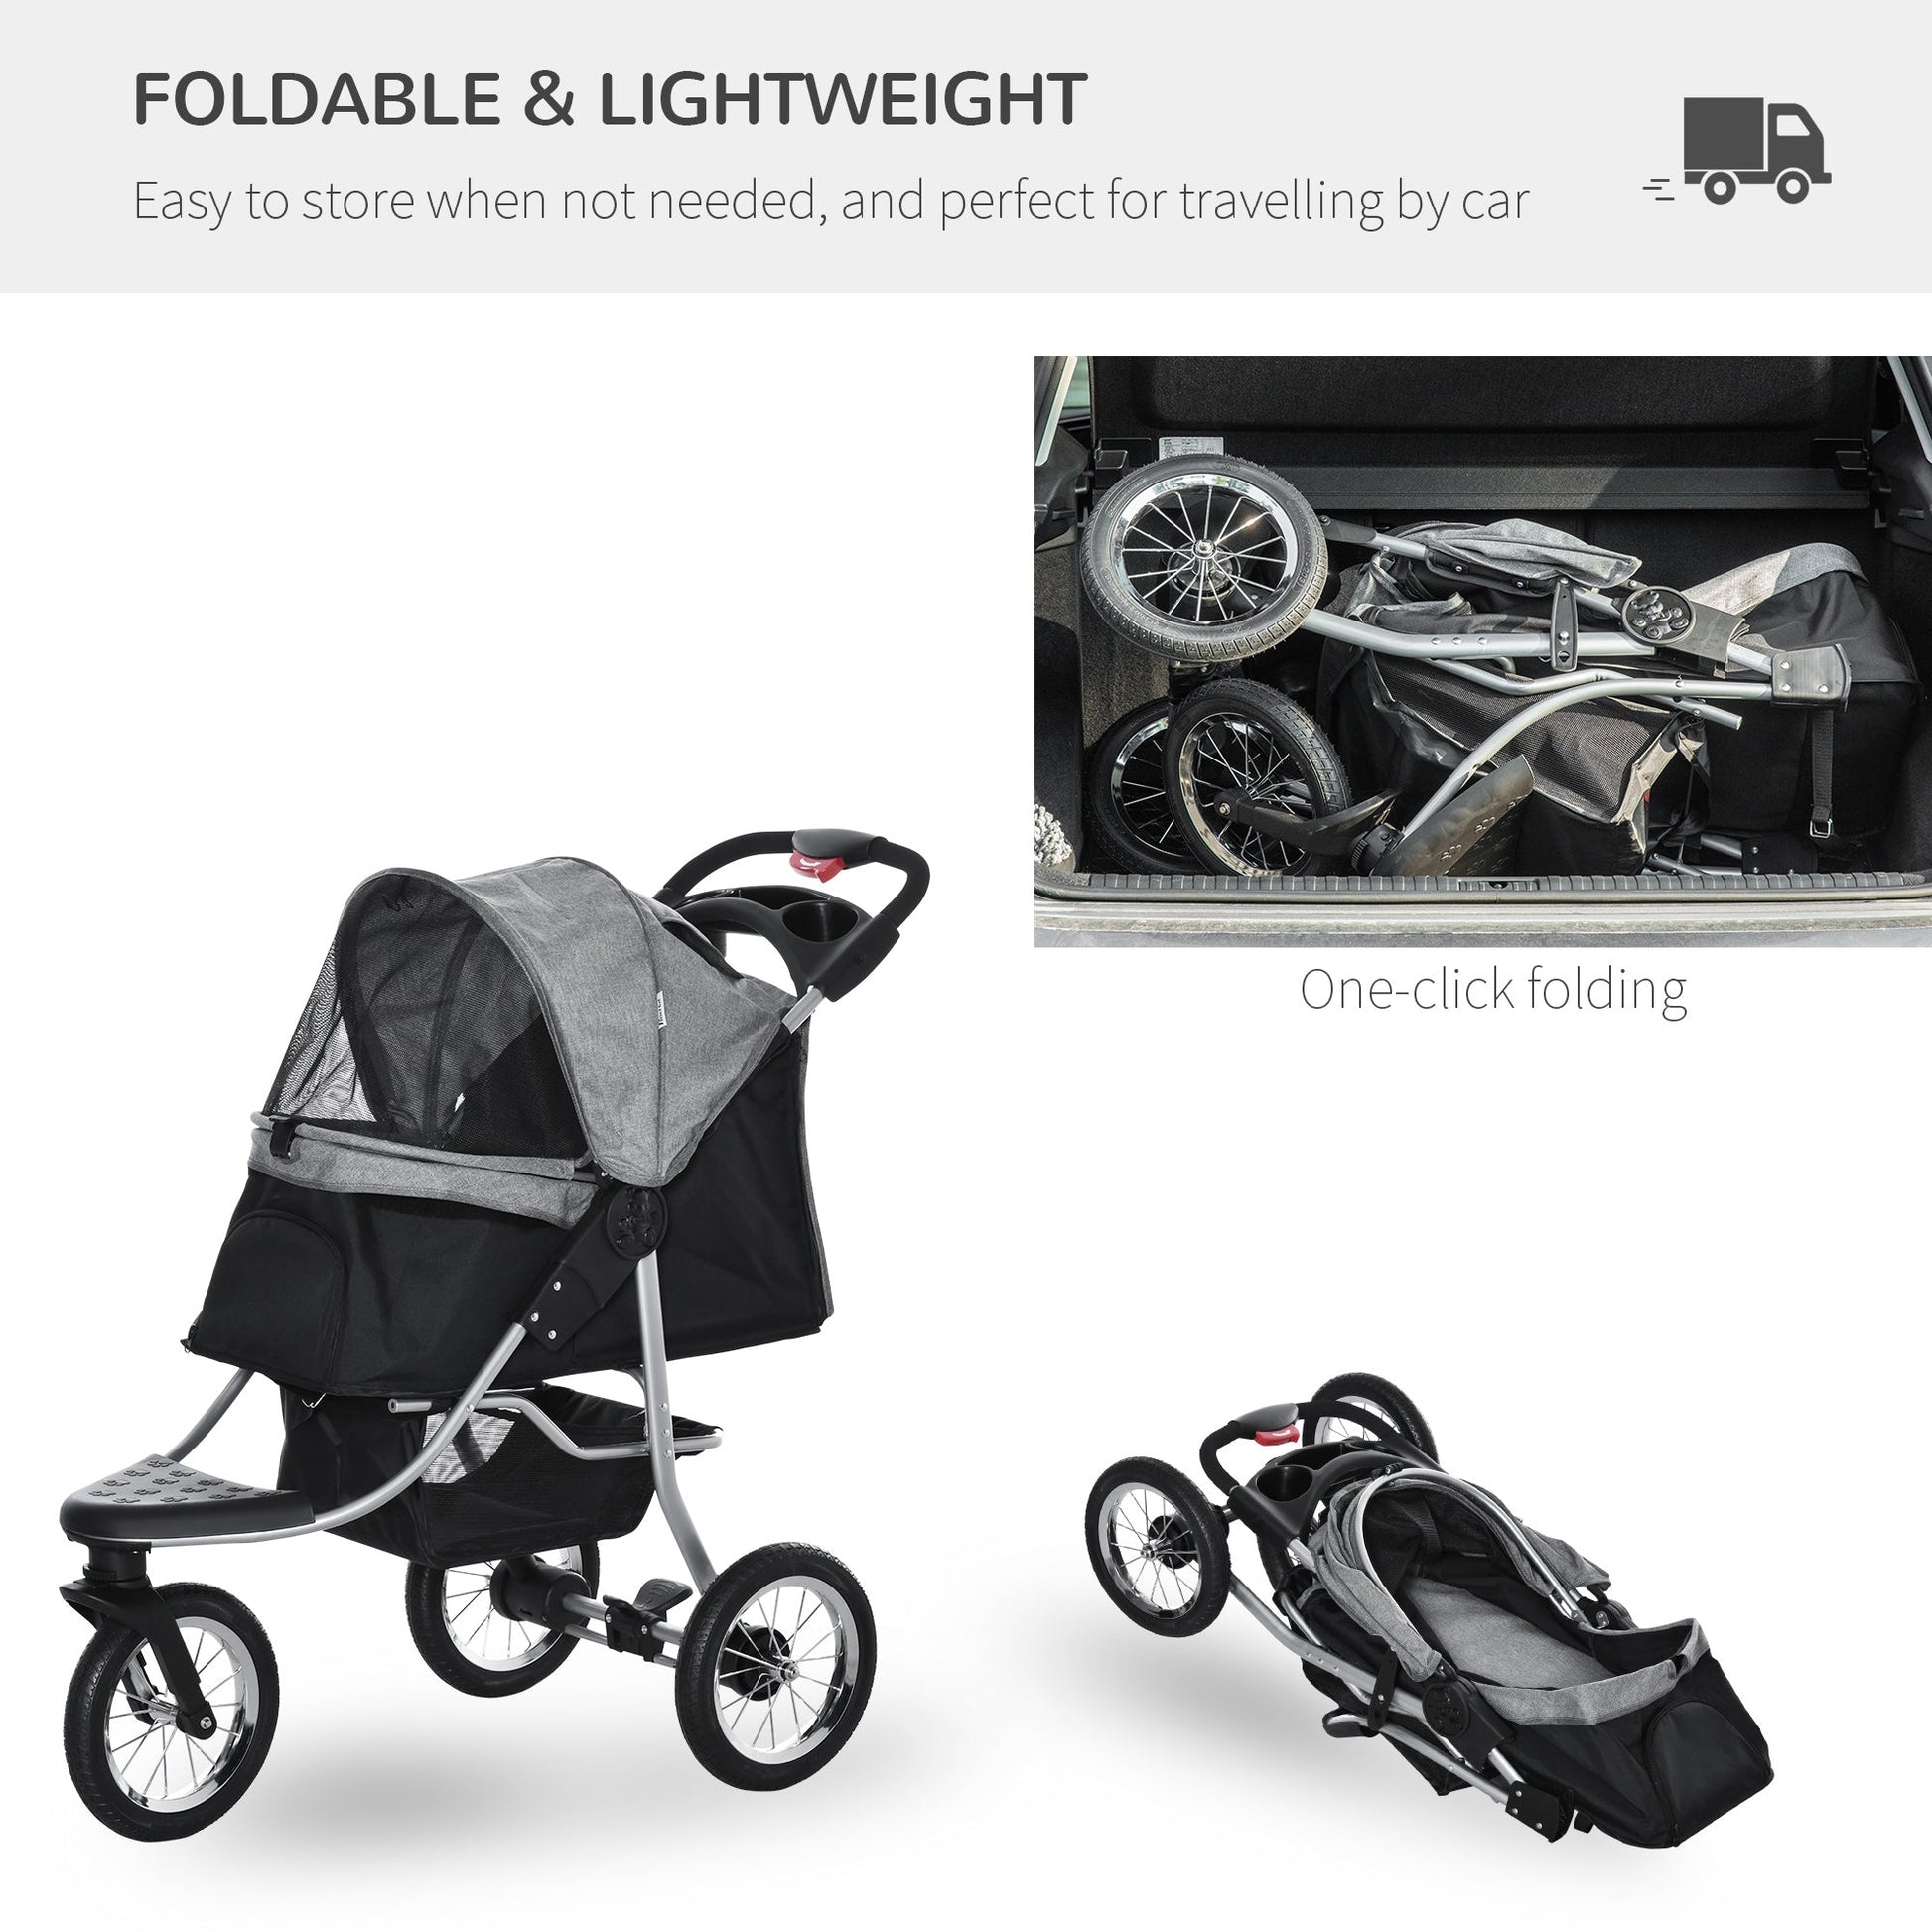 Pet Stroller with 3 Wheels, One-click Folding Design, Adjustable Canopy, Zippered Mesh Window Door, Grey at Gallery Canada